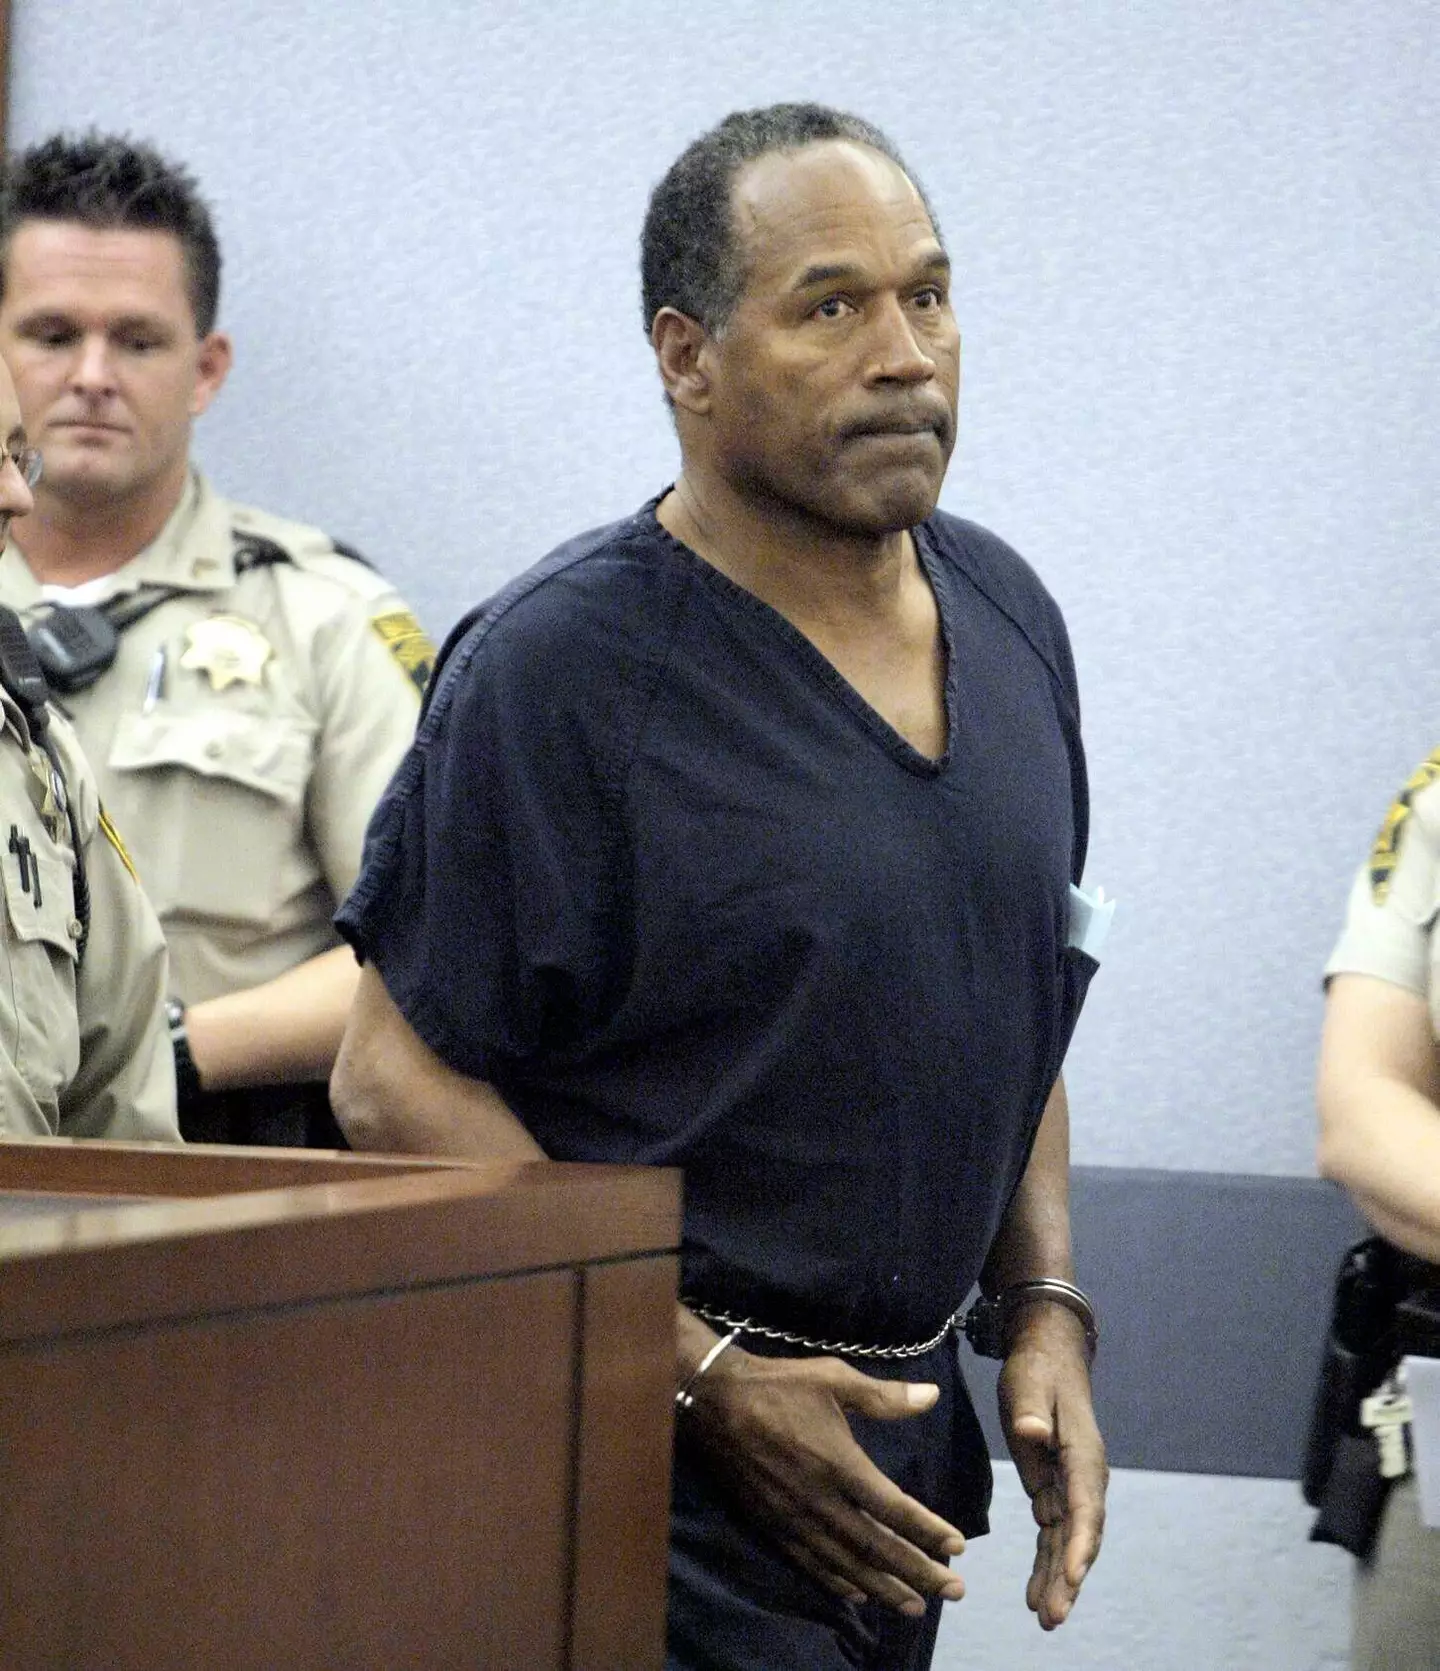 Simpson appearing in court in 2007.